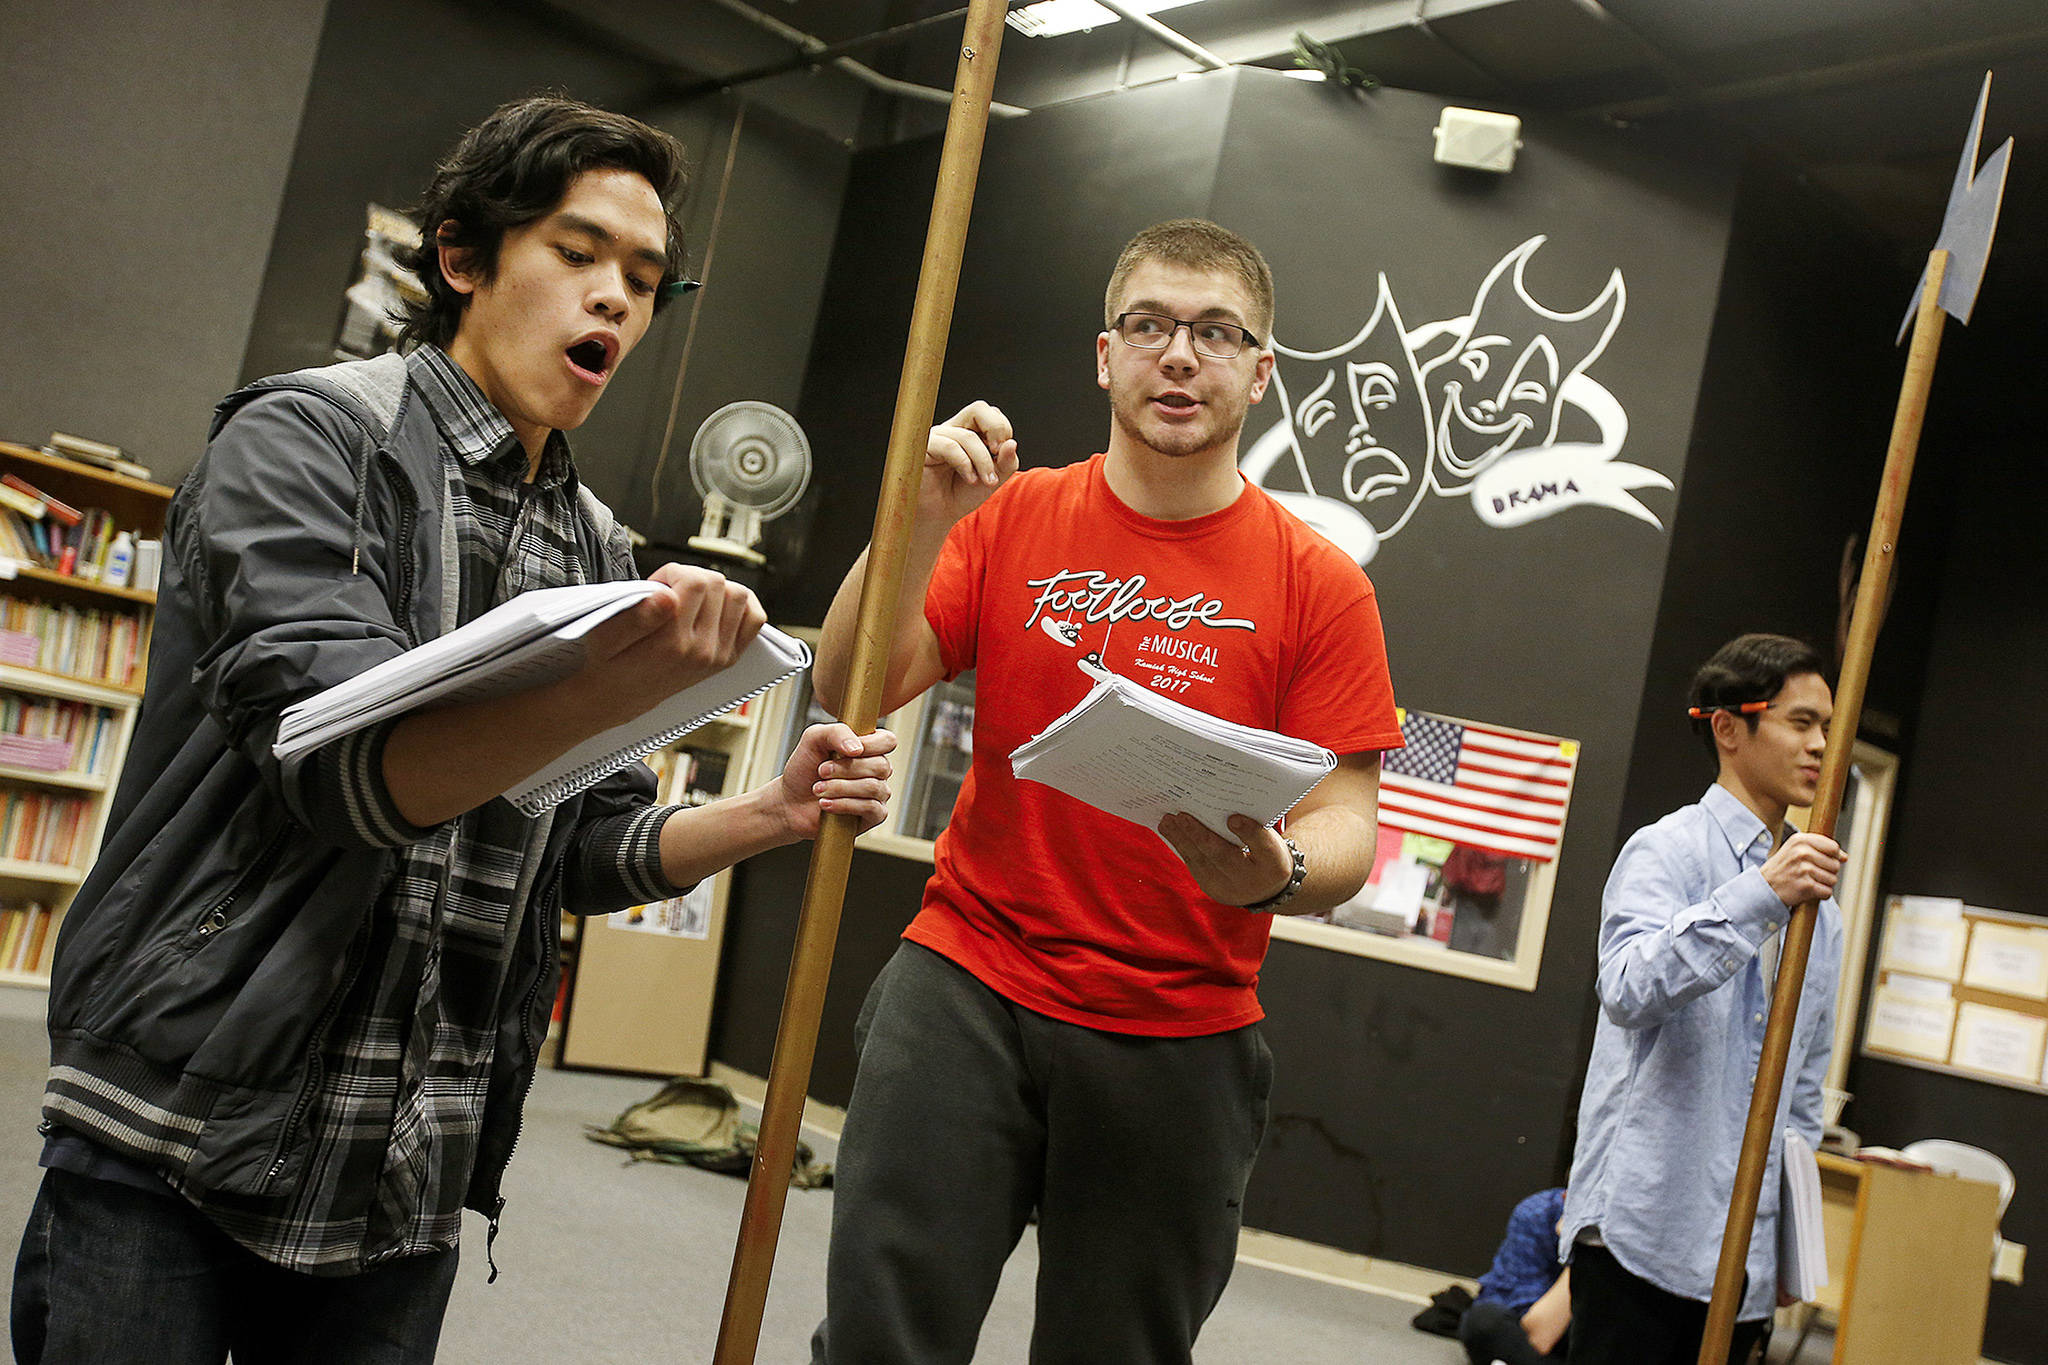 Kamiak High School students (from left) Teddy Kouthong, Jack Burrows and Eddie Kouthong practice lines from “Spamalot”after school on Thursday in Mukilteo. (Ian Terry / The Herald)